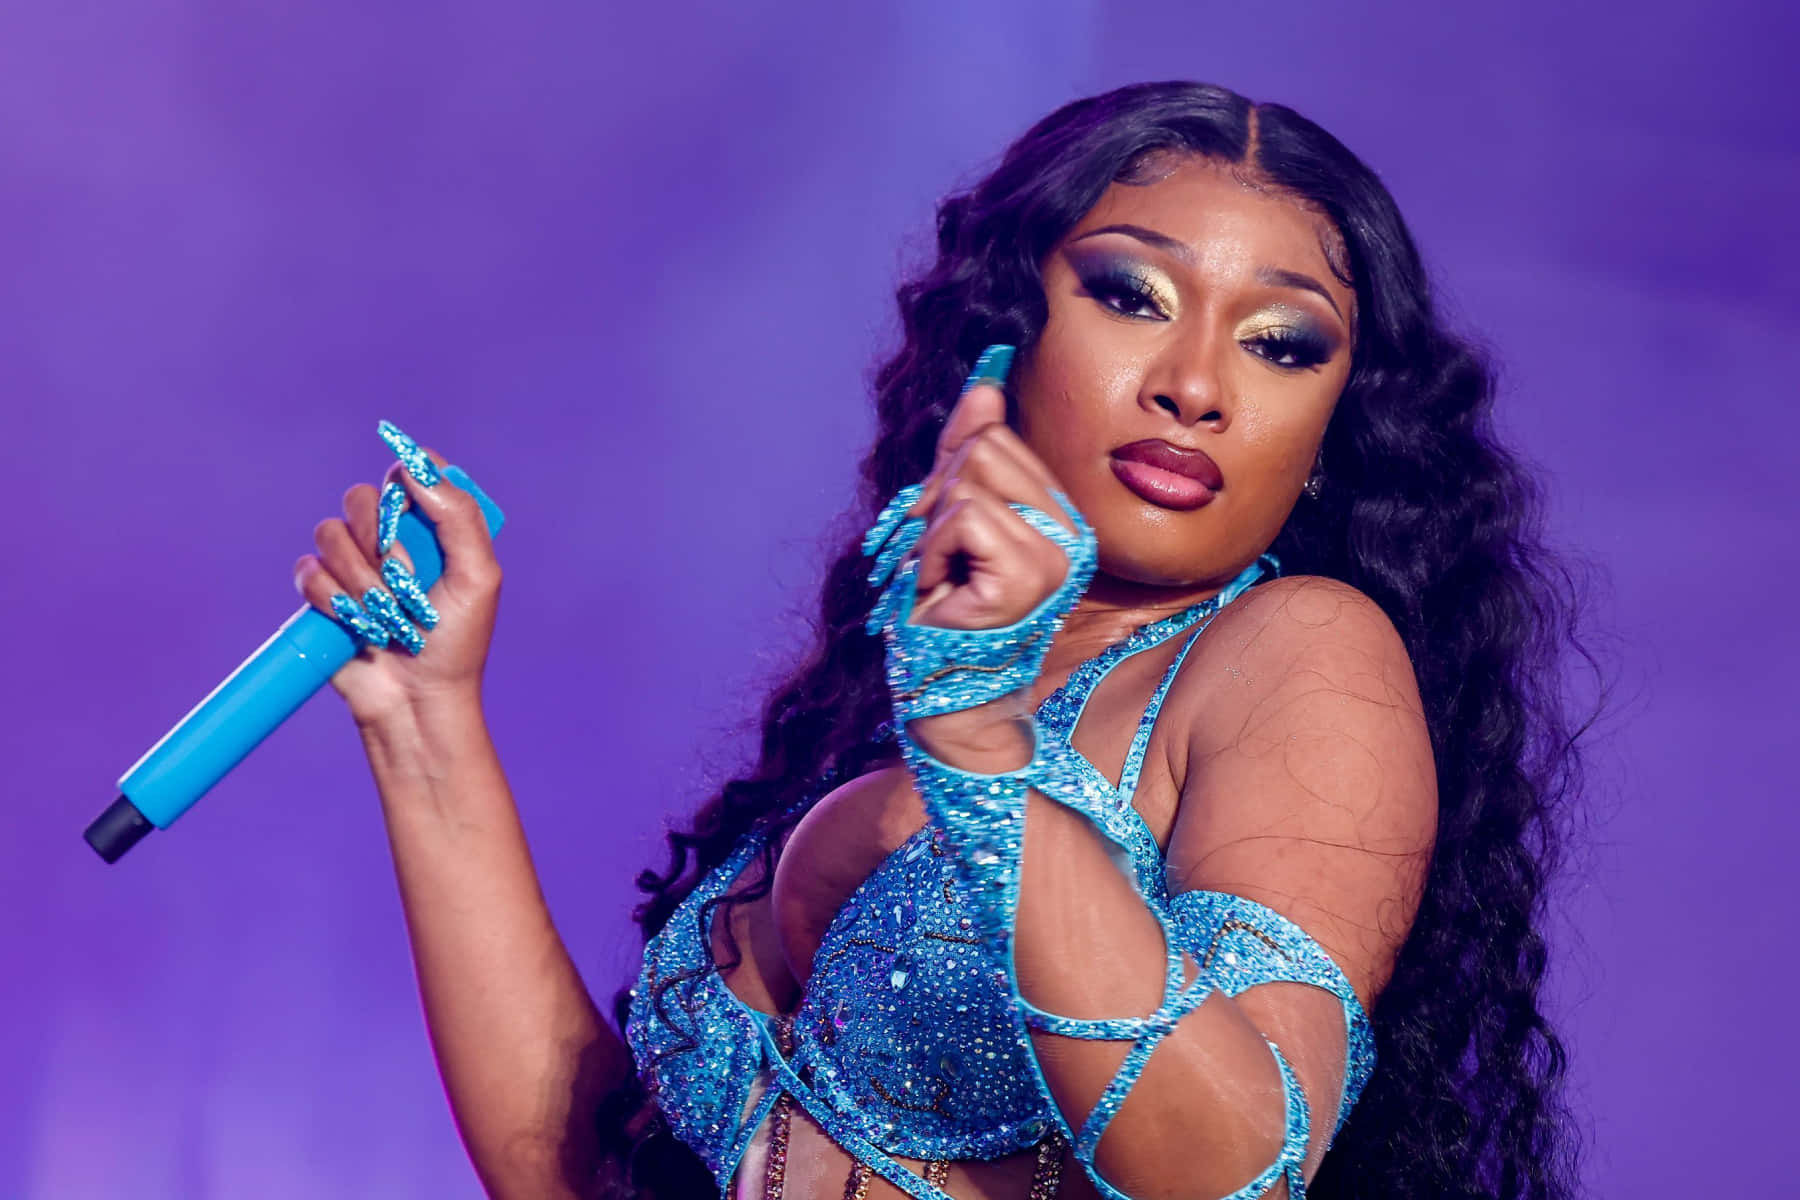 Megan Thee Stallion striking a pose for the camera in her stylish outfit